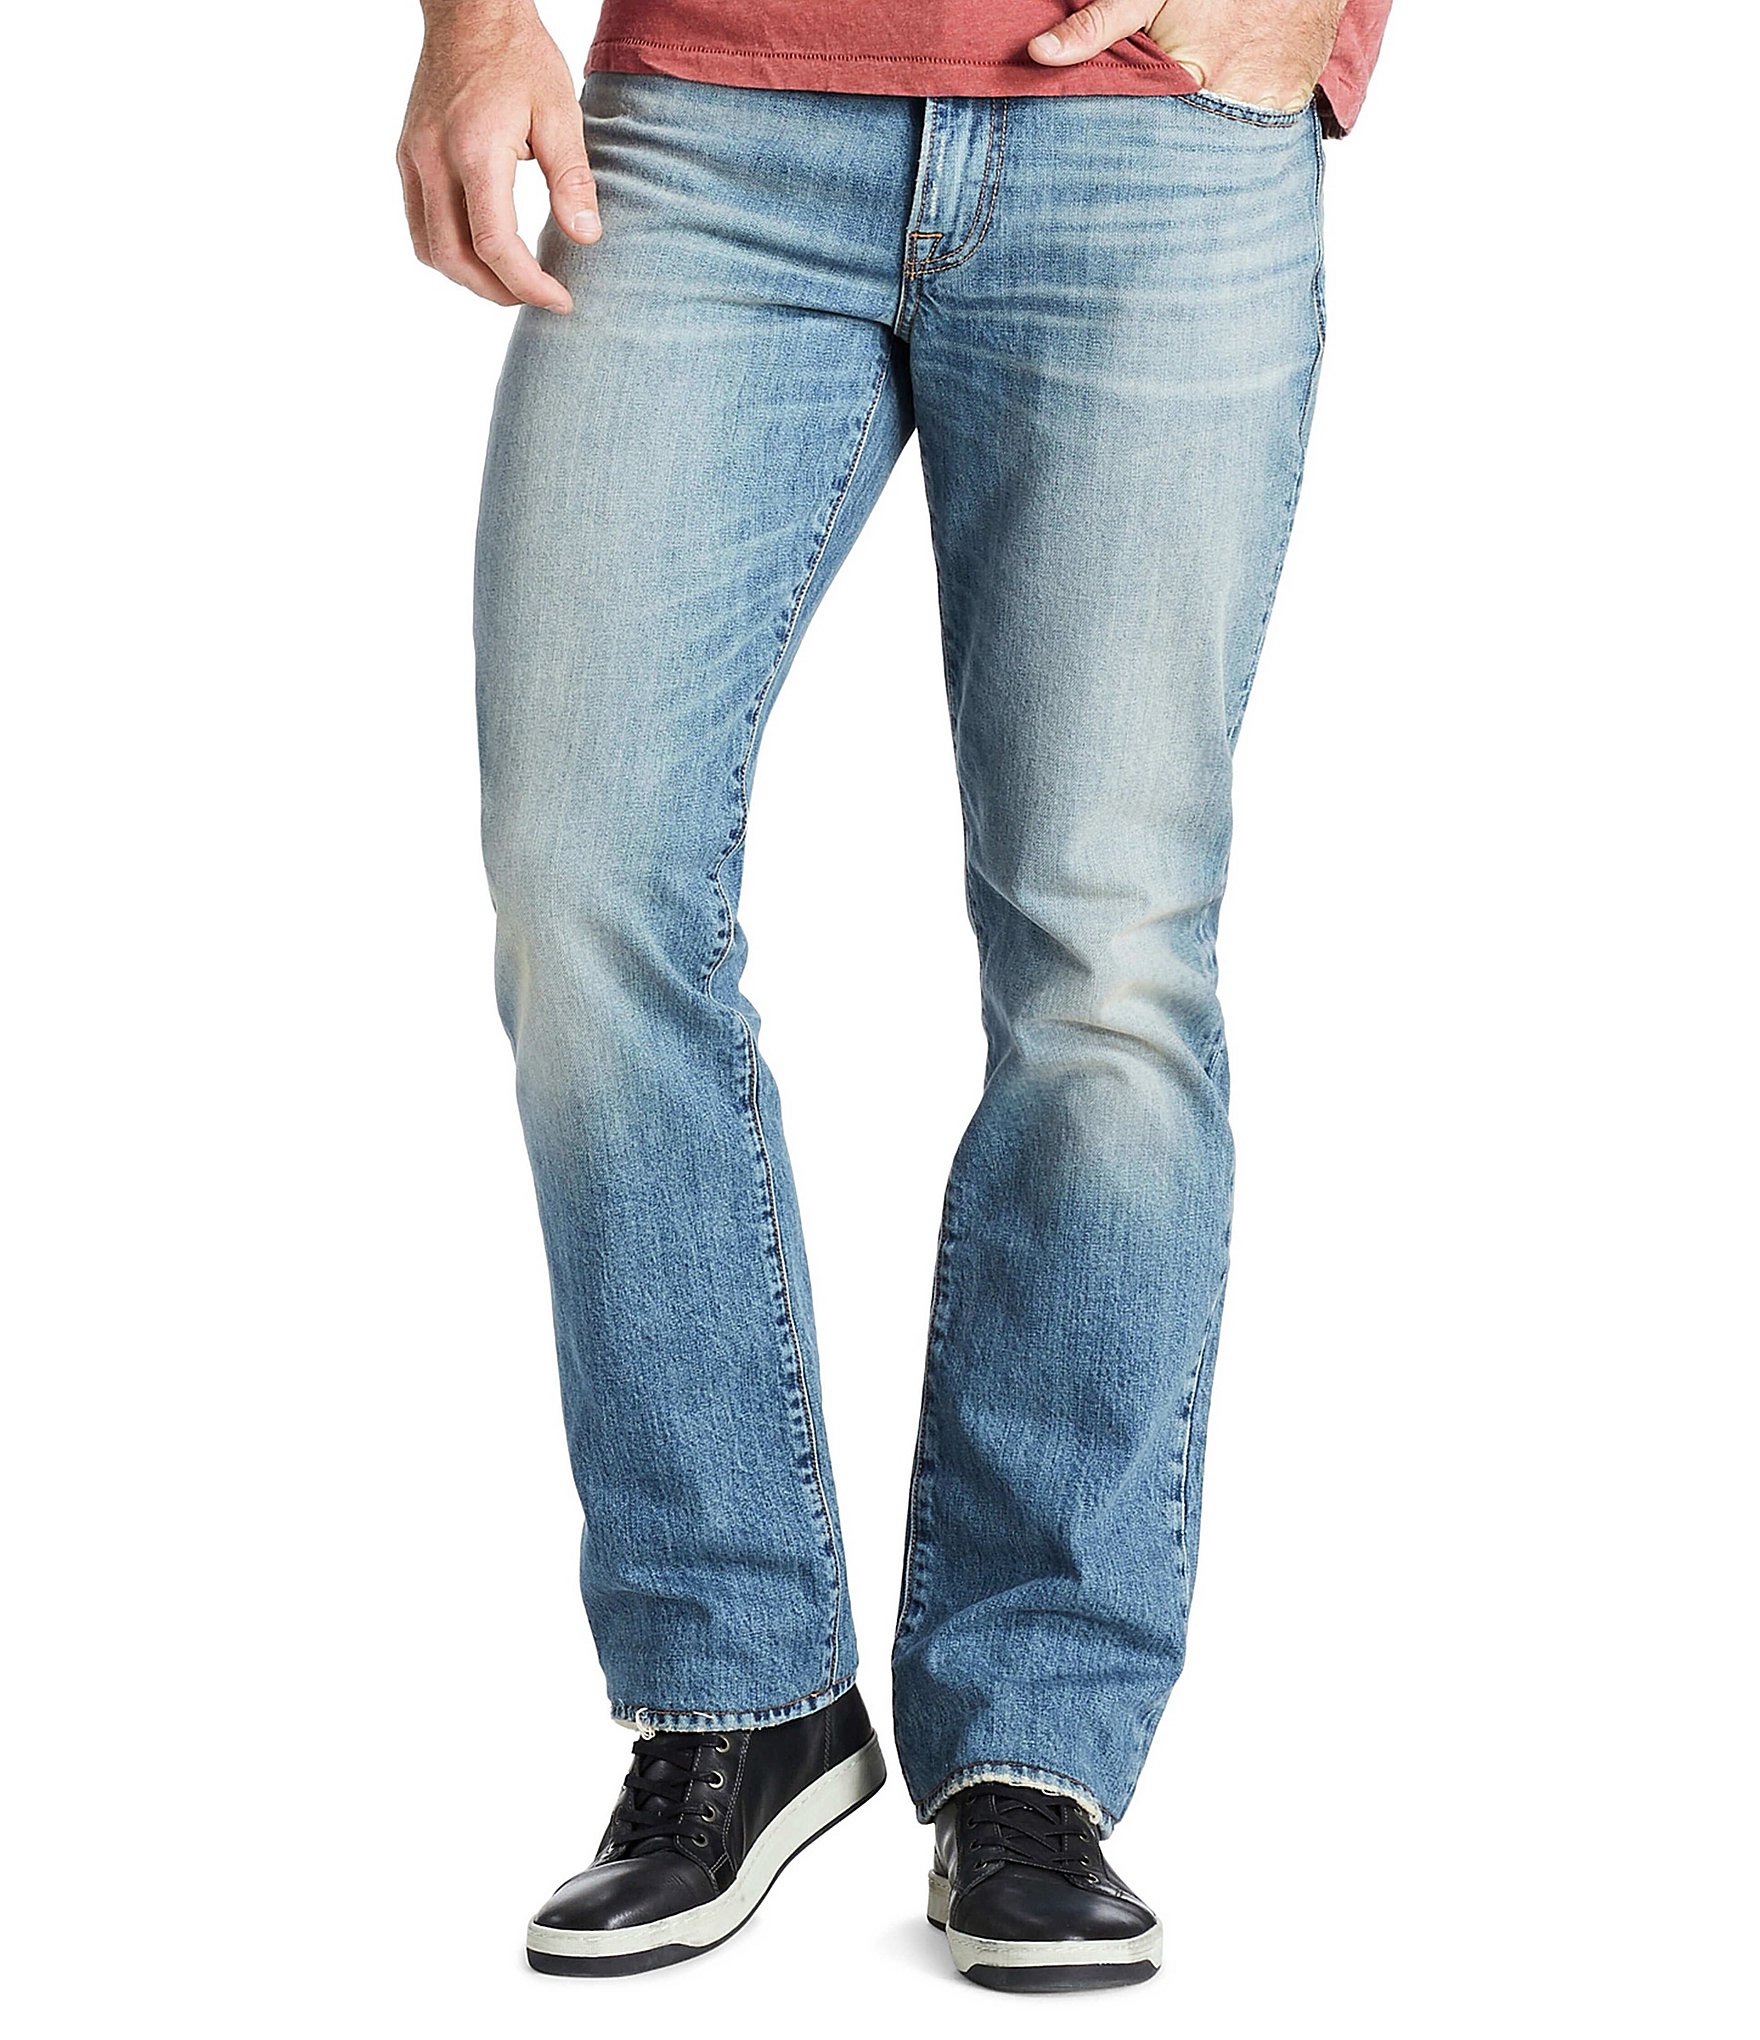 Lucky Brand Fender Jeans 30 (32x32) Relaxed Bootleg 100% Cotton